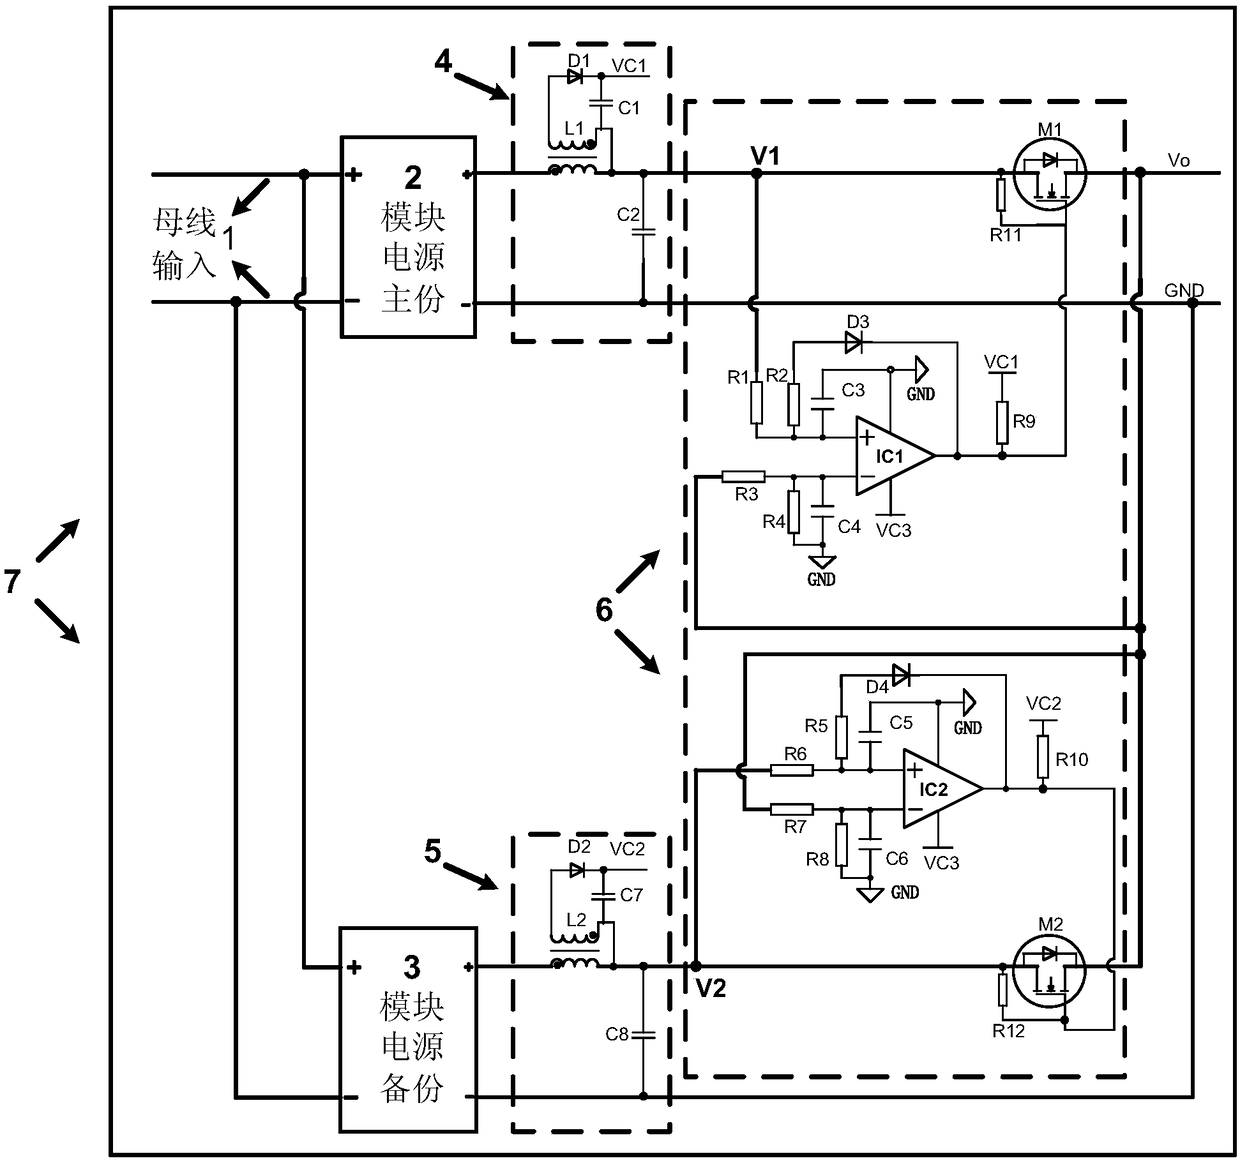 A highly reliable output isolation control circuit for main backup power supply